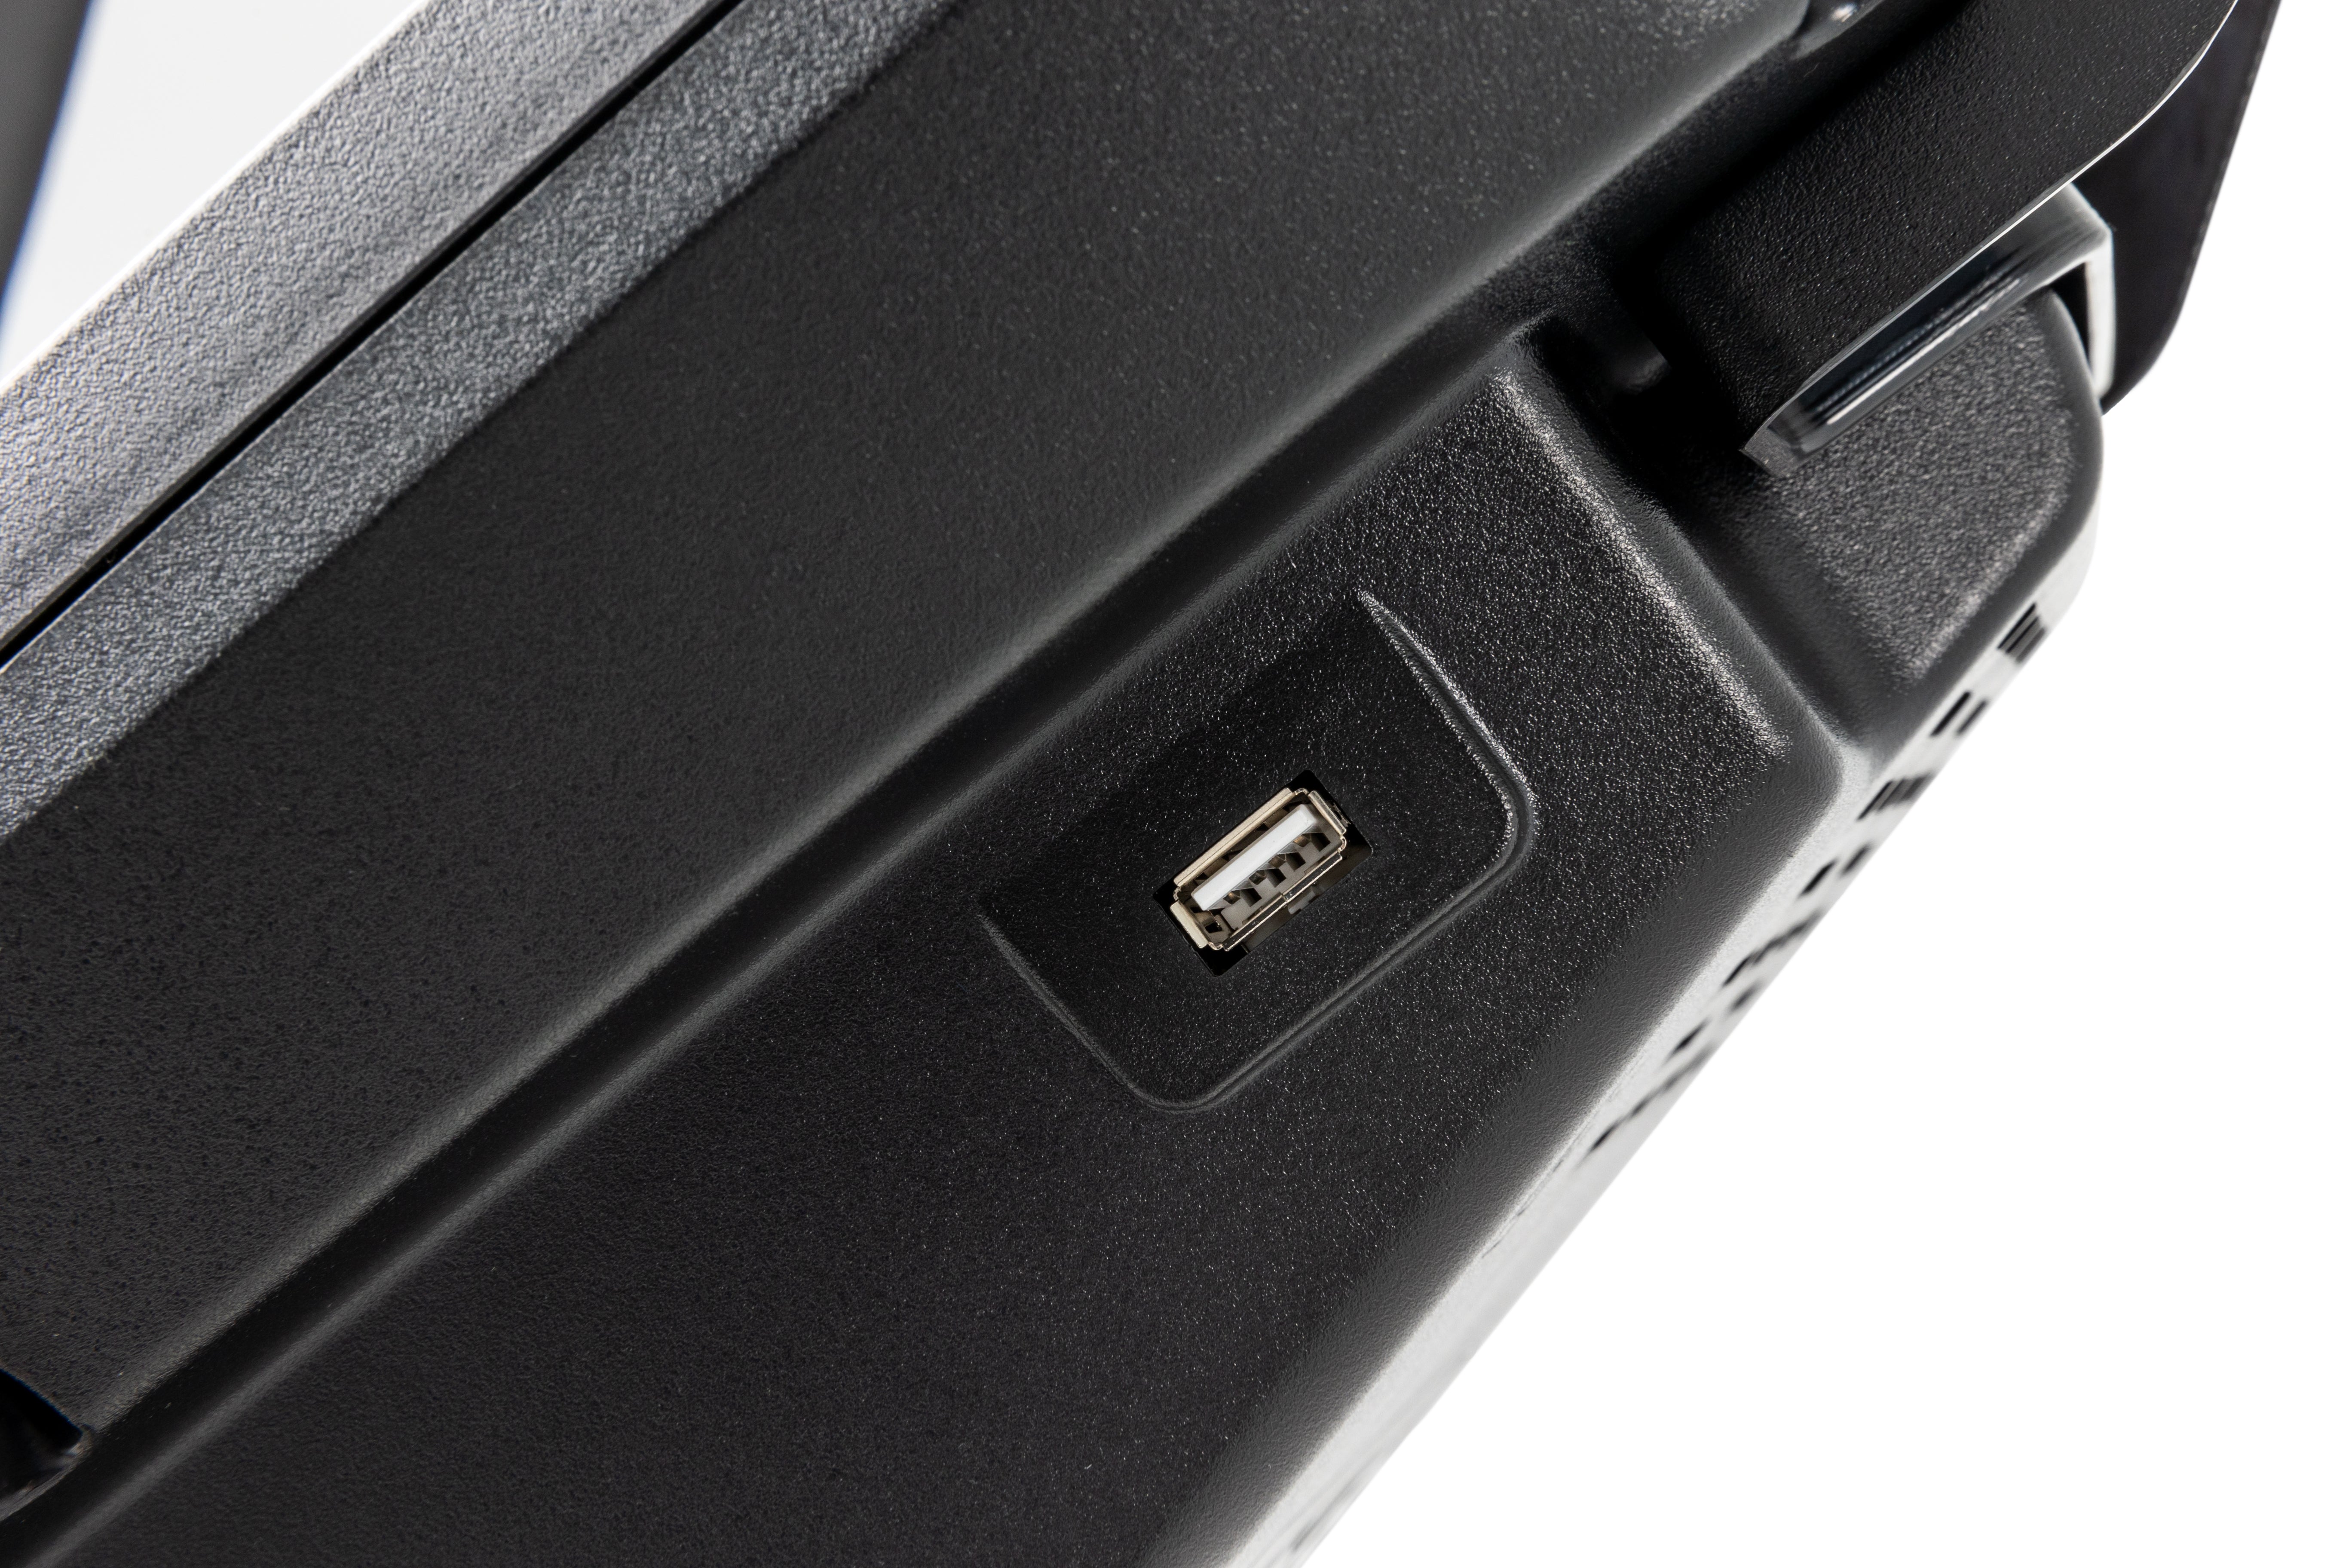 Close-up of the side panel of the Sole B94, showcasing a USB port embedded in a textured black surface with subtle design details.